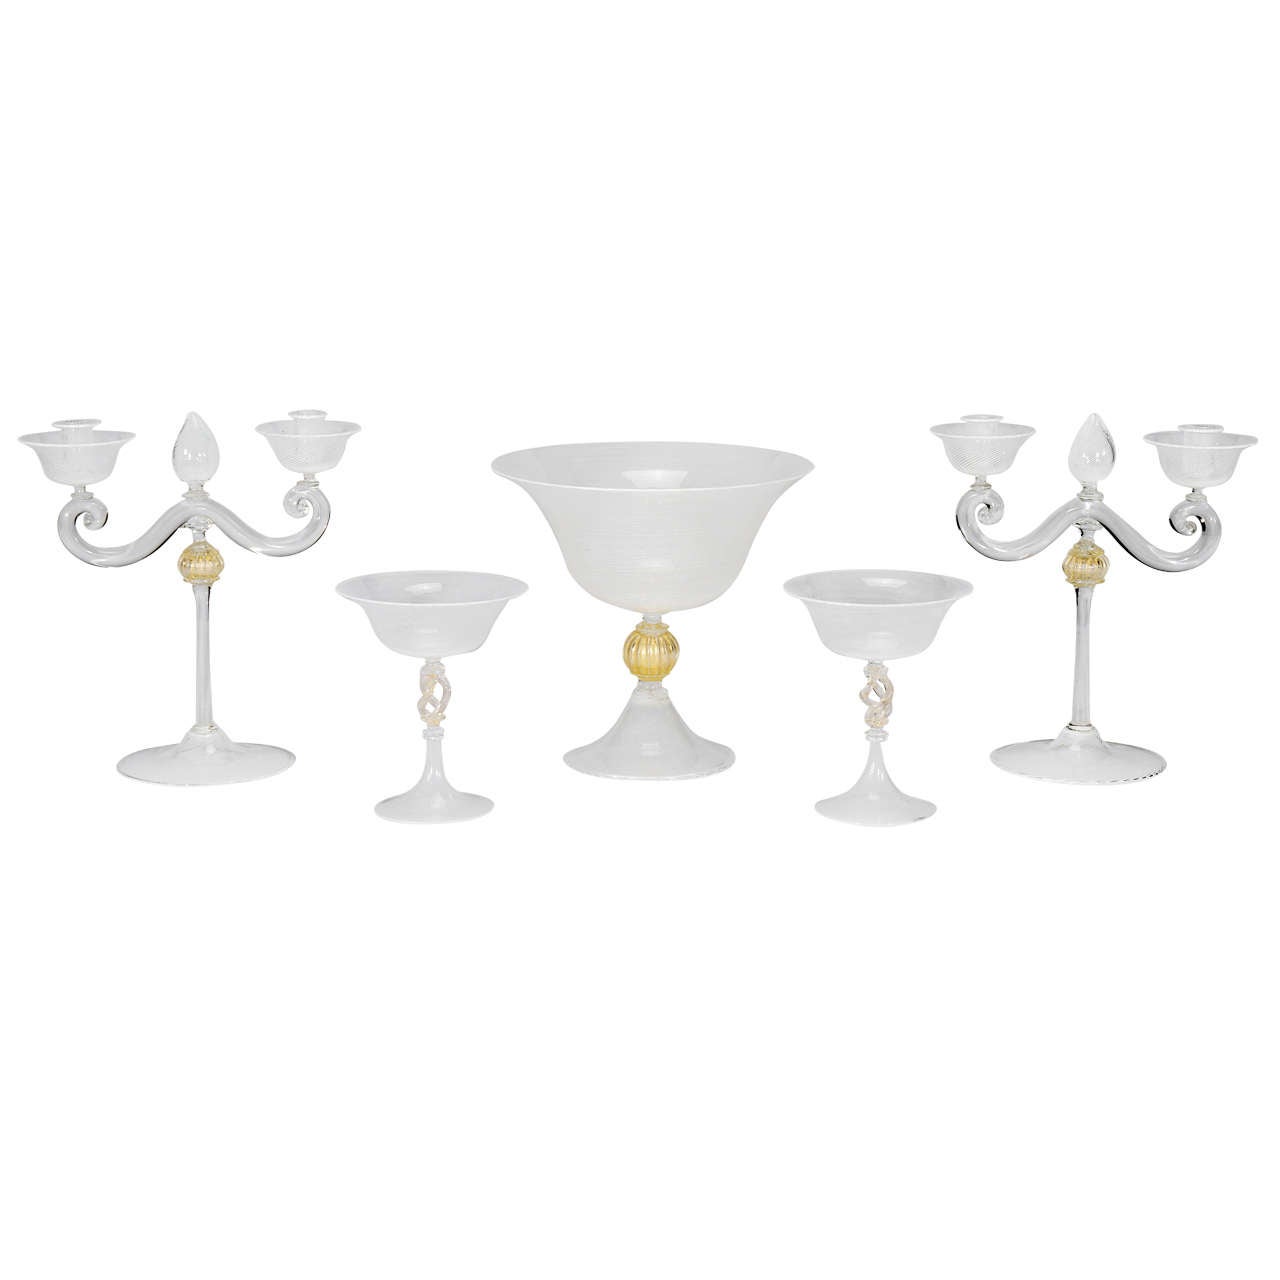 Cenedese, Murano 5 Piece Table Centerpiece Set with White Threading